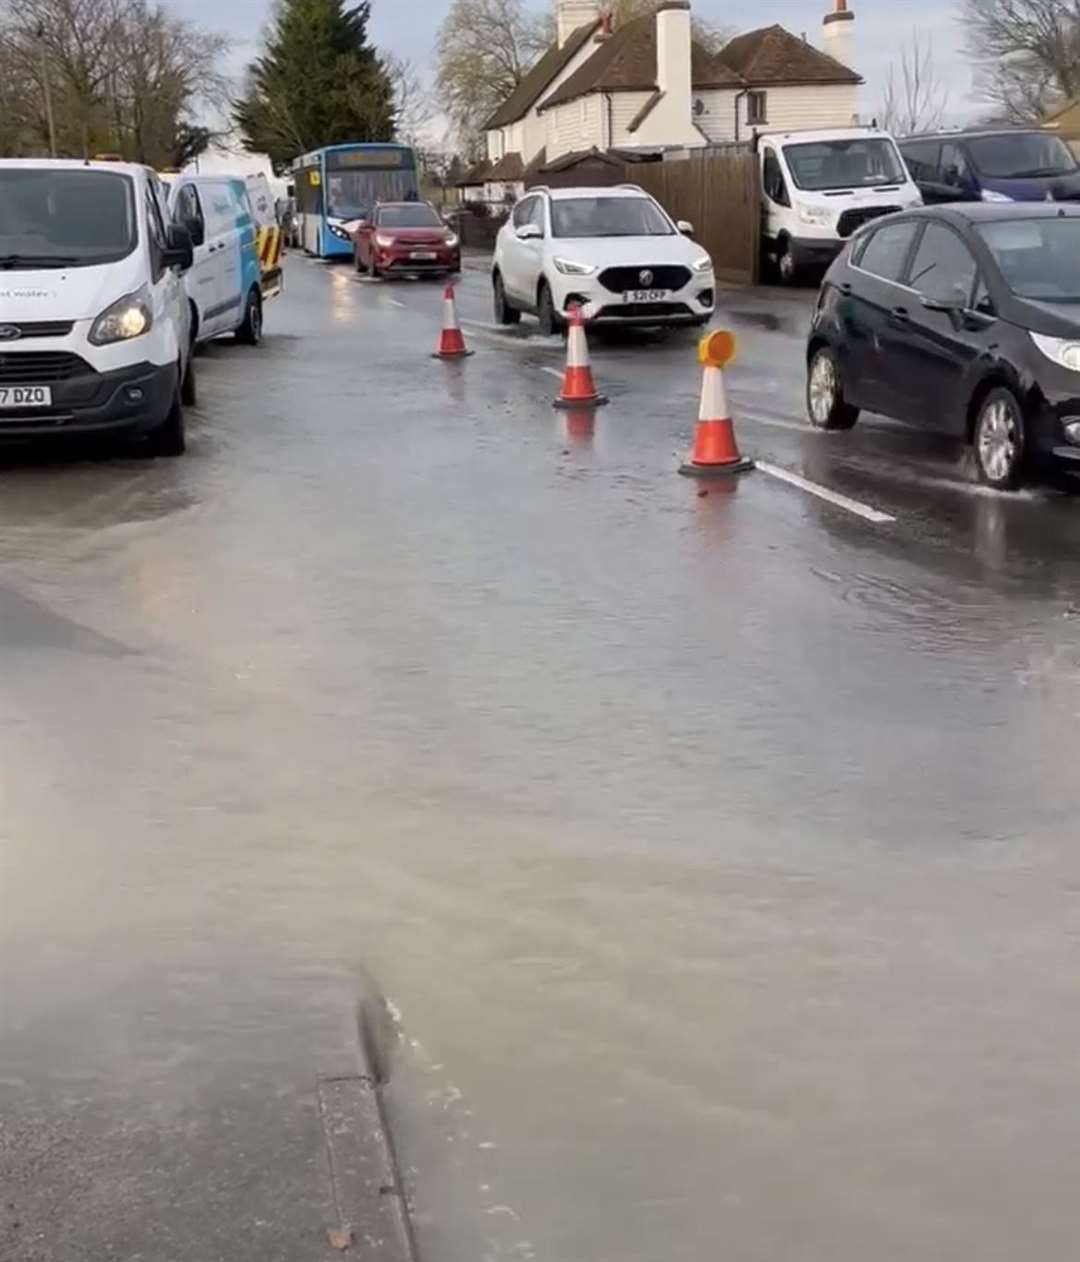 Traffic has been queuing due to the flood. Picture: Dalice Wigg